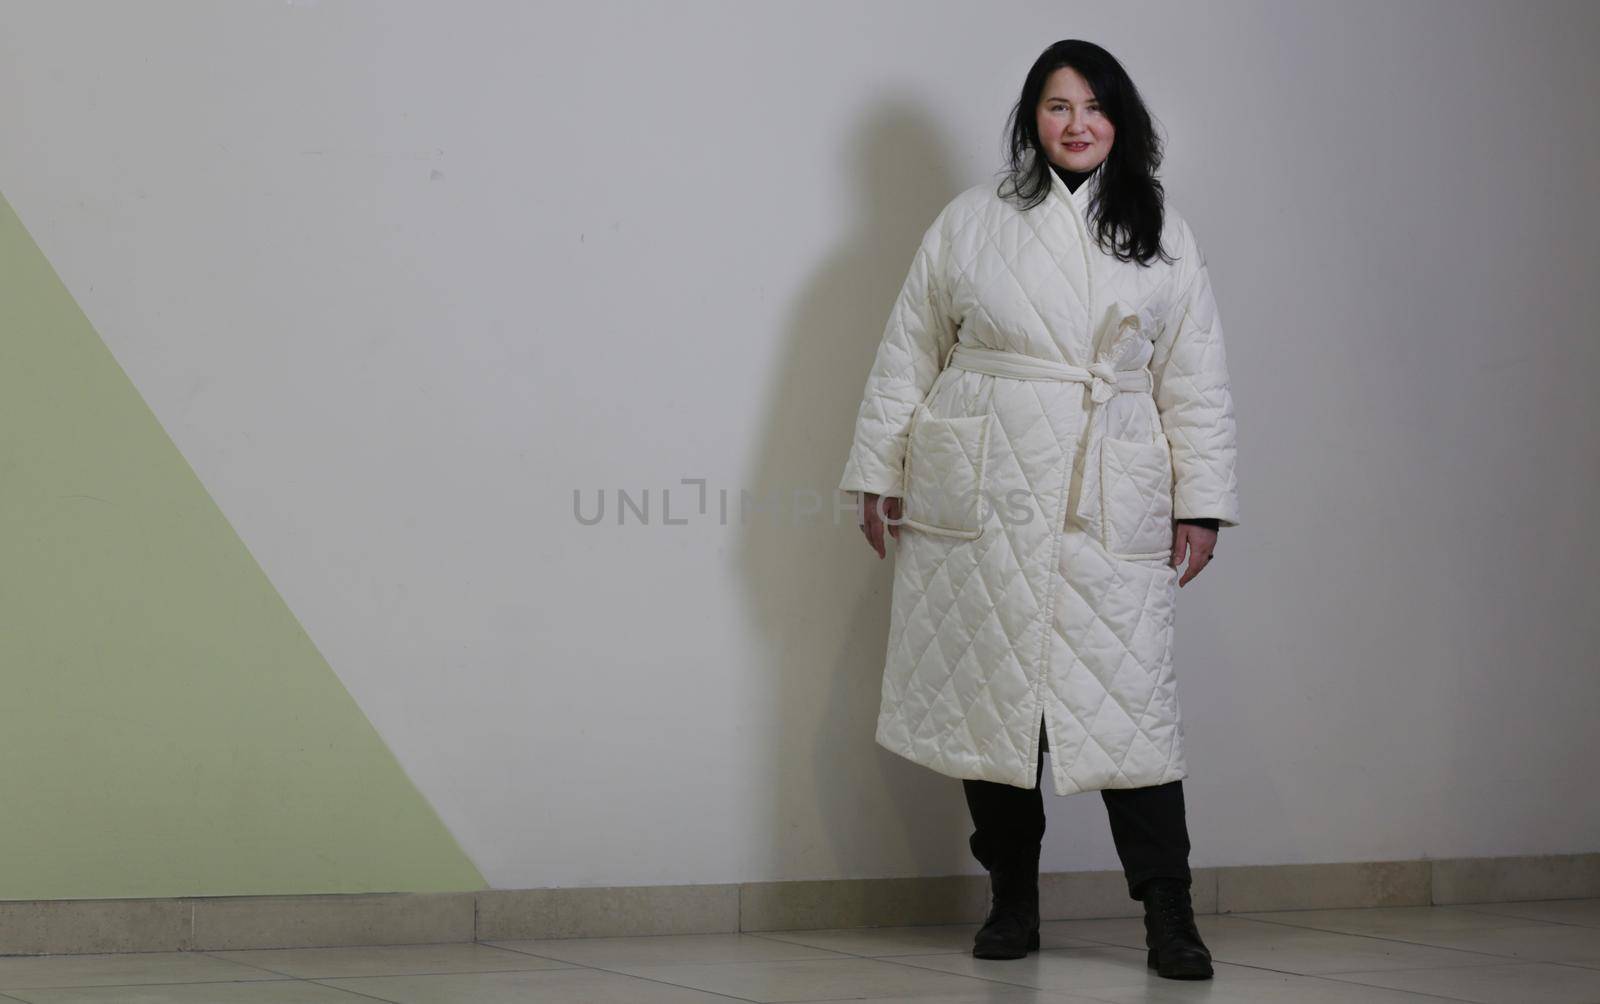 An attractive woman plus size in a white winter coat against a light wall poses and looks at the camera.